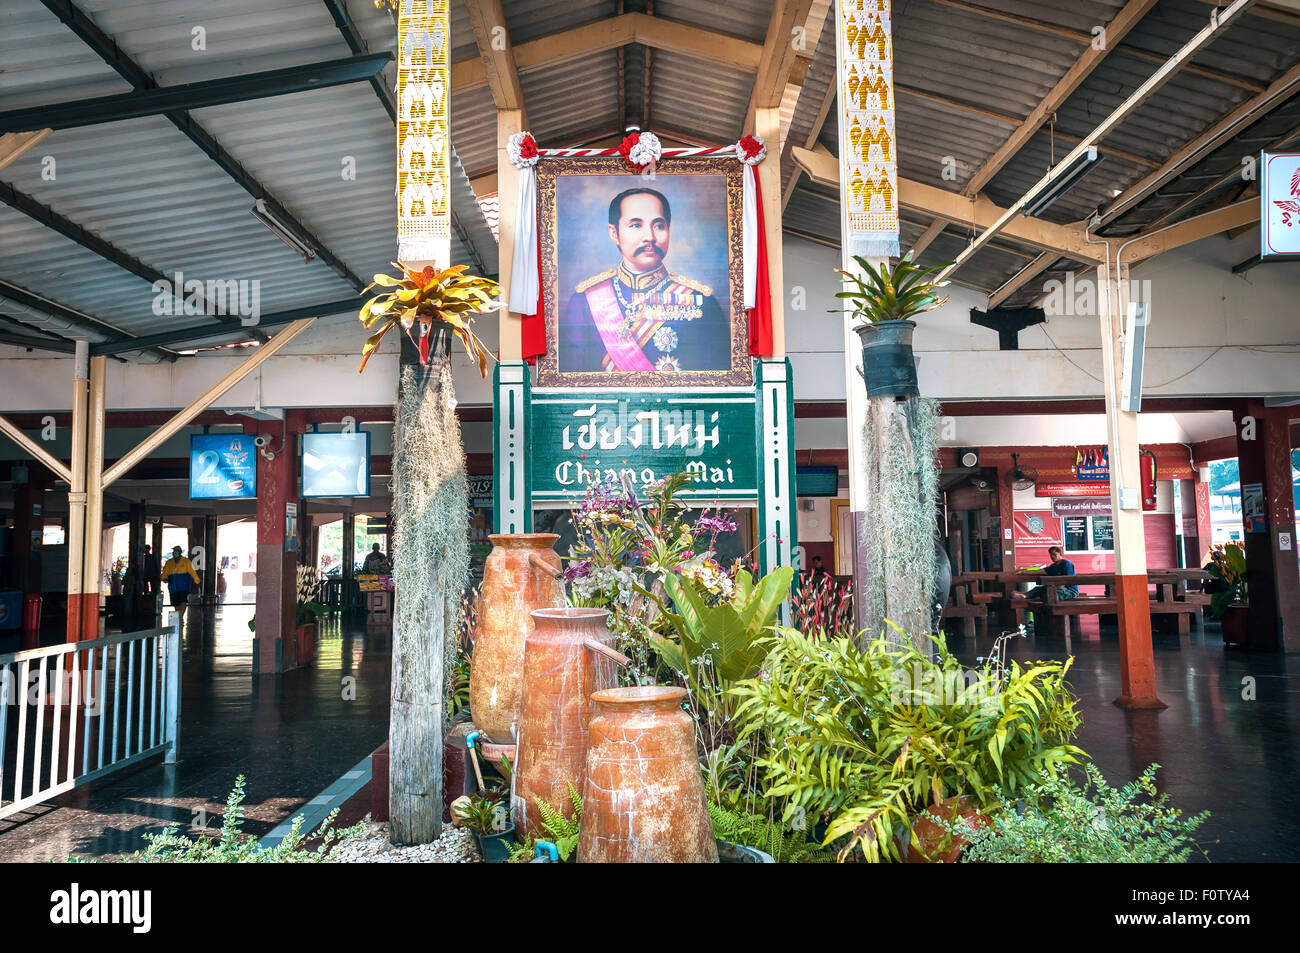 Portrait of King Rama V at Chiang Mai railway station, northern Thailand Stock Photo